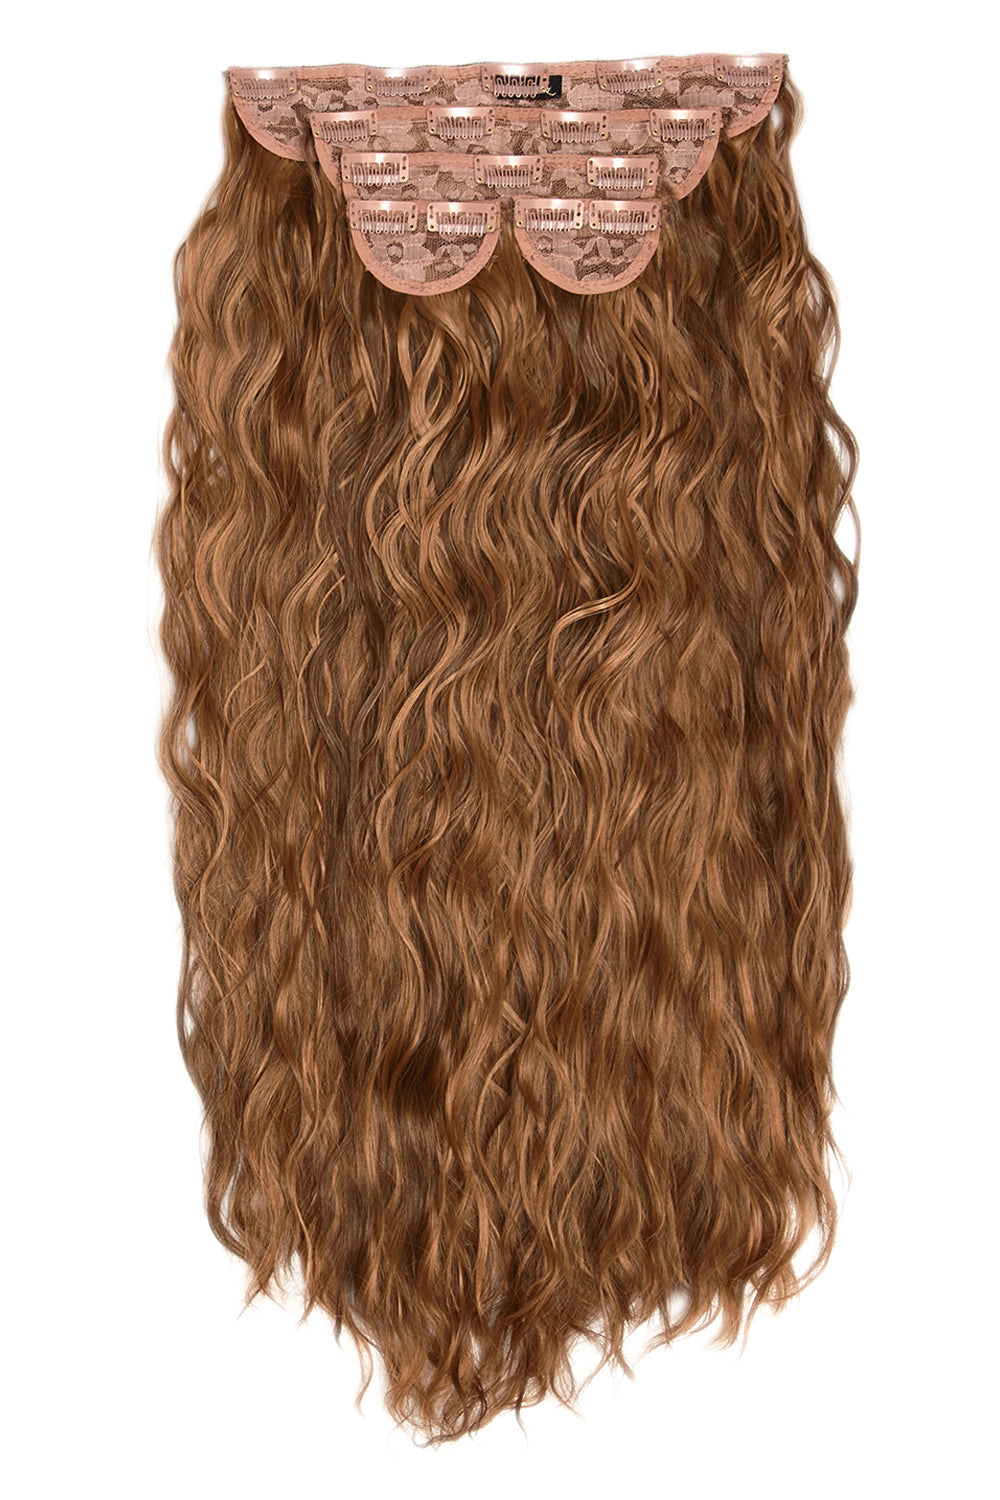 Super Thick 26" 5 Piece Waist Length Wave Clip In Hair Extensions - LullaBellz  - Toffee Brown Festival Hair Inspiration